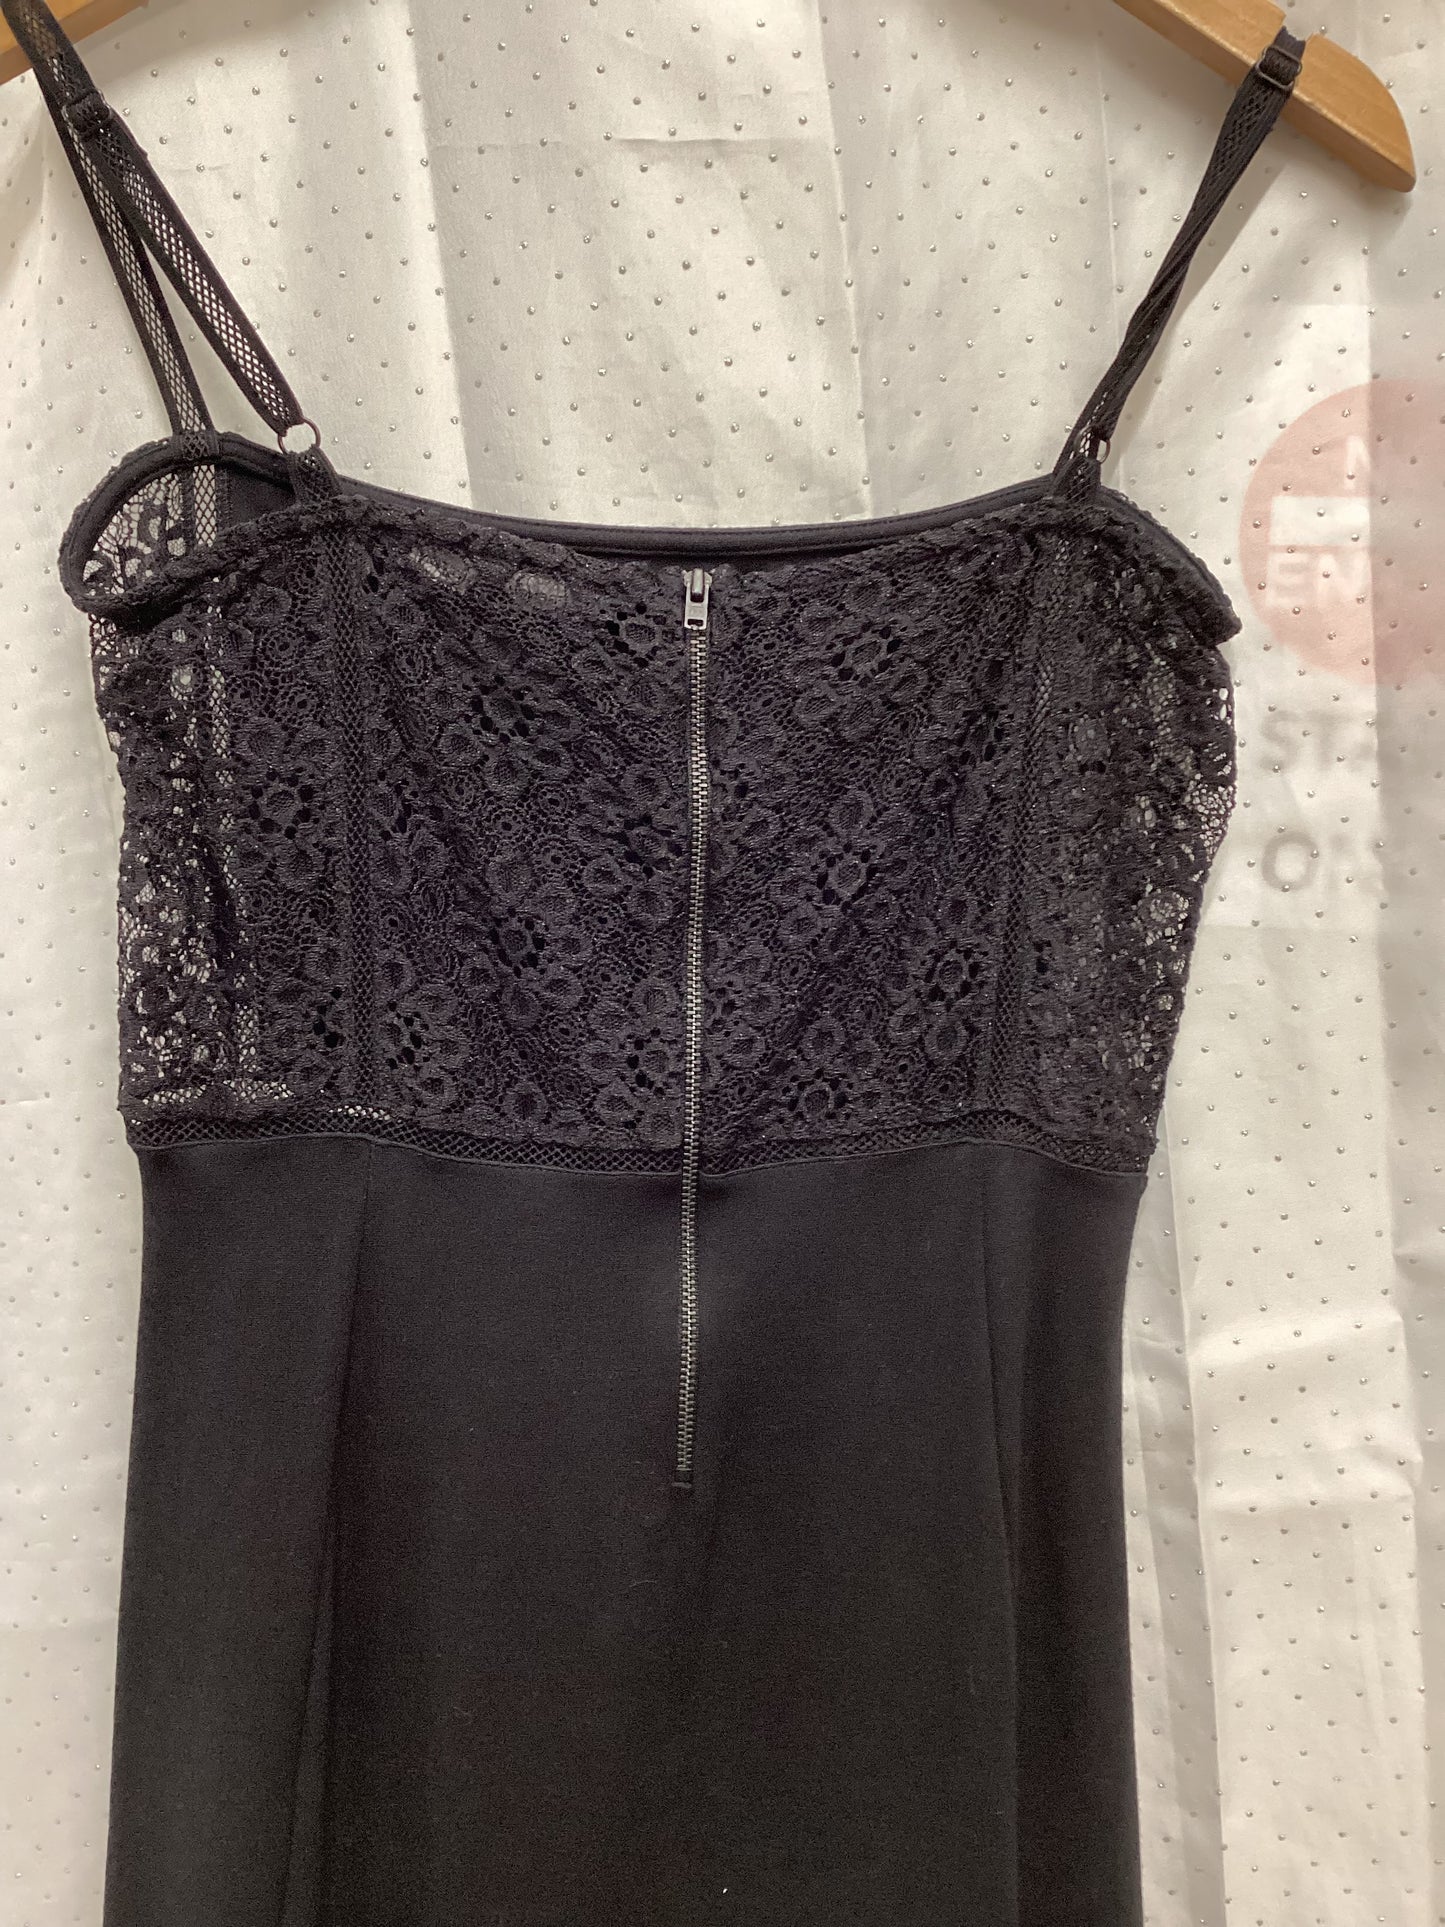 French Connection Size 10 LongLine Black Dress with Lace Detail